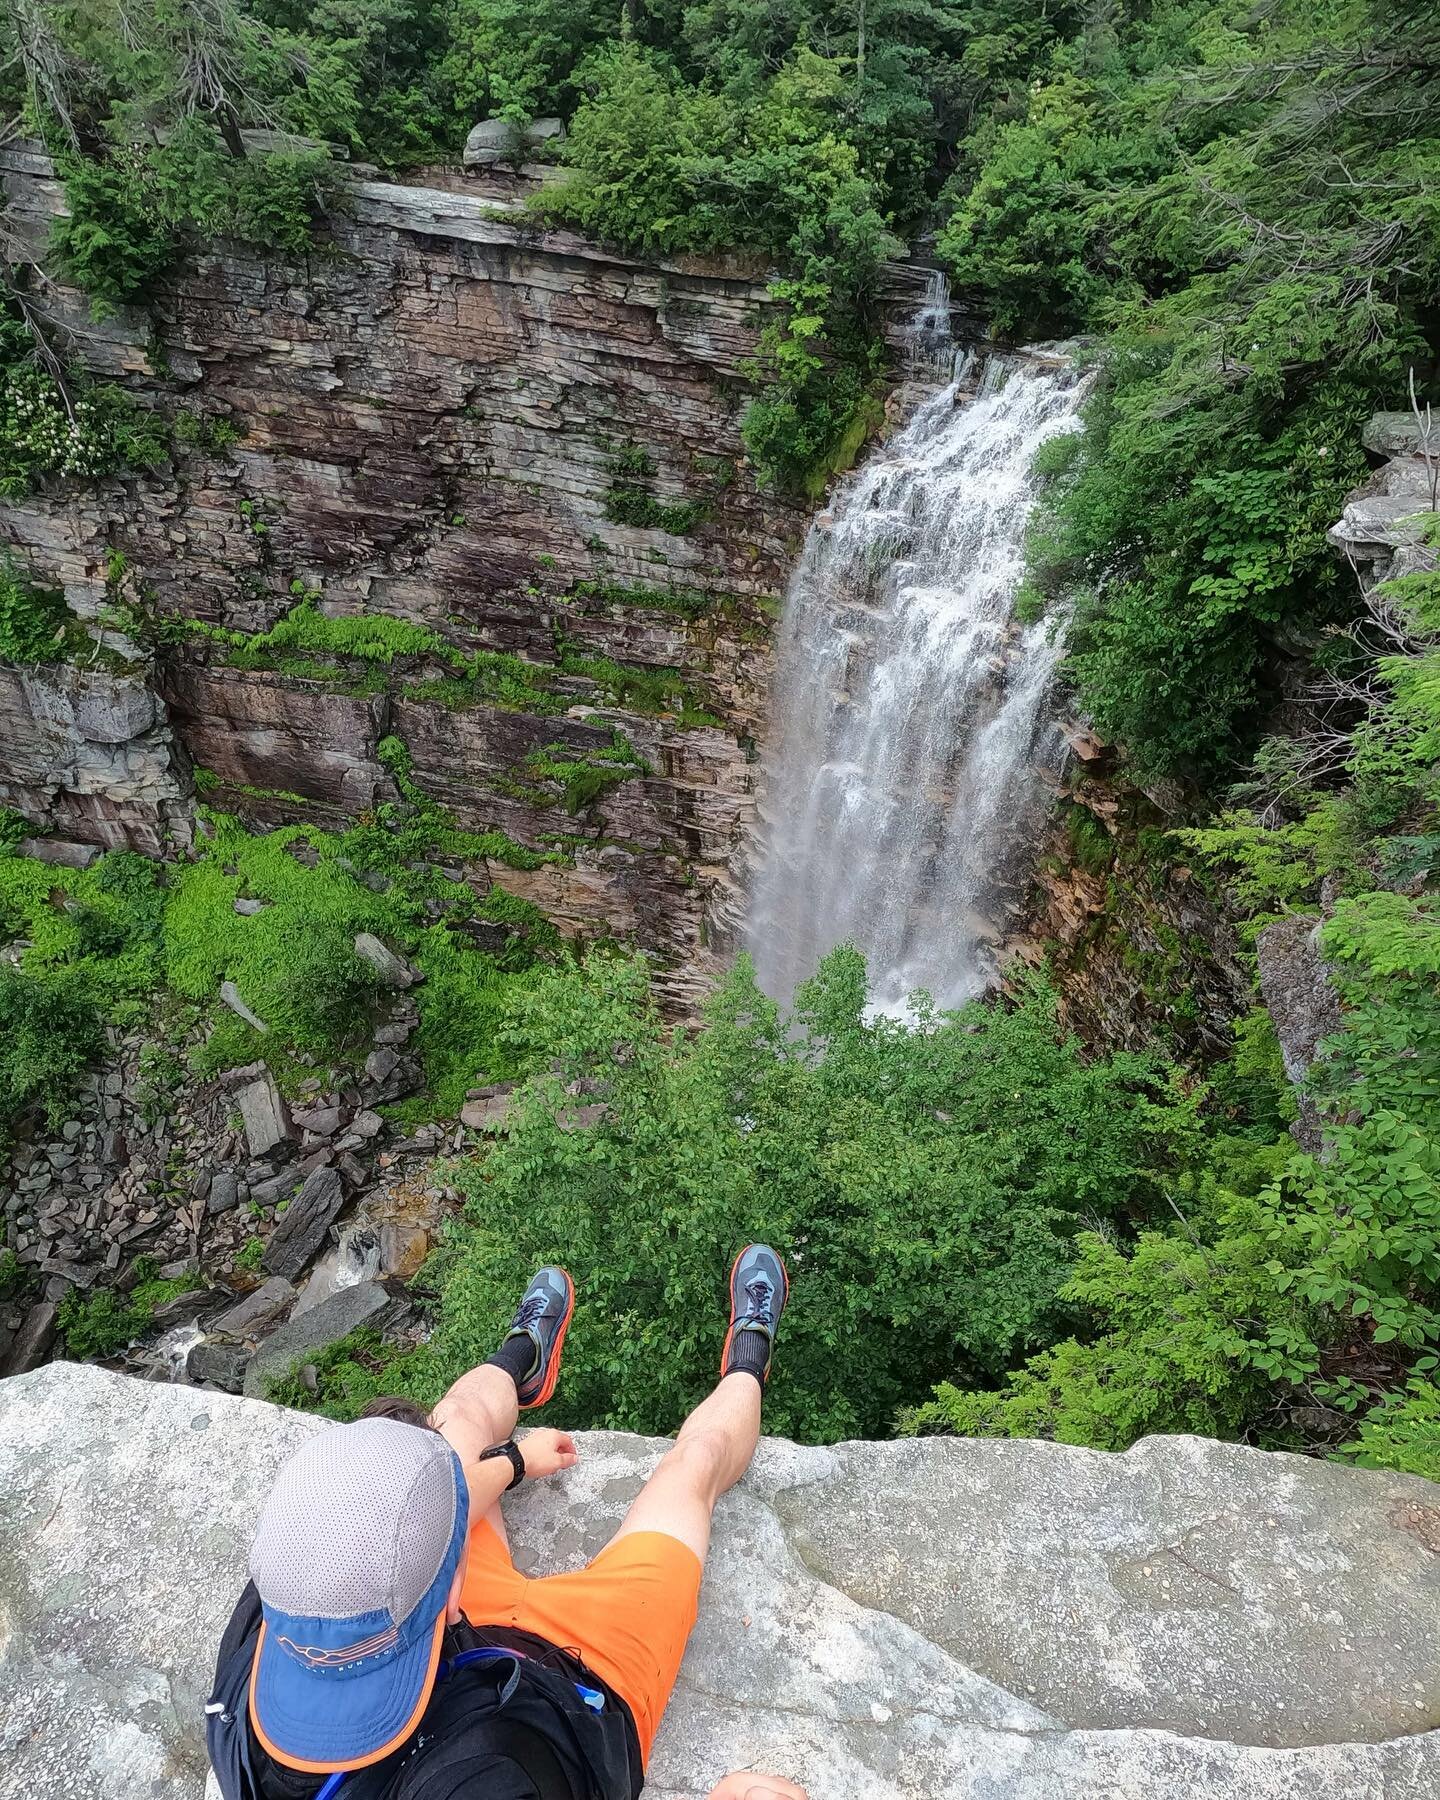 Verkeerder Kill Falls - The trails were slippery, the views were foggy, and there was some light rain today. Despite all that, today&rsquo;s trail run led me to one of my favorite waterfalls and I enjoyed every minute of it.